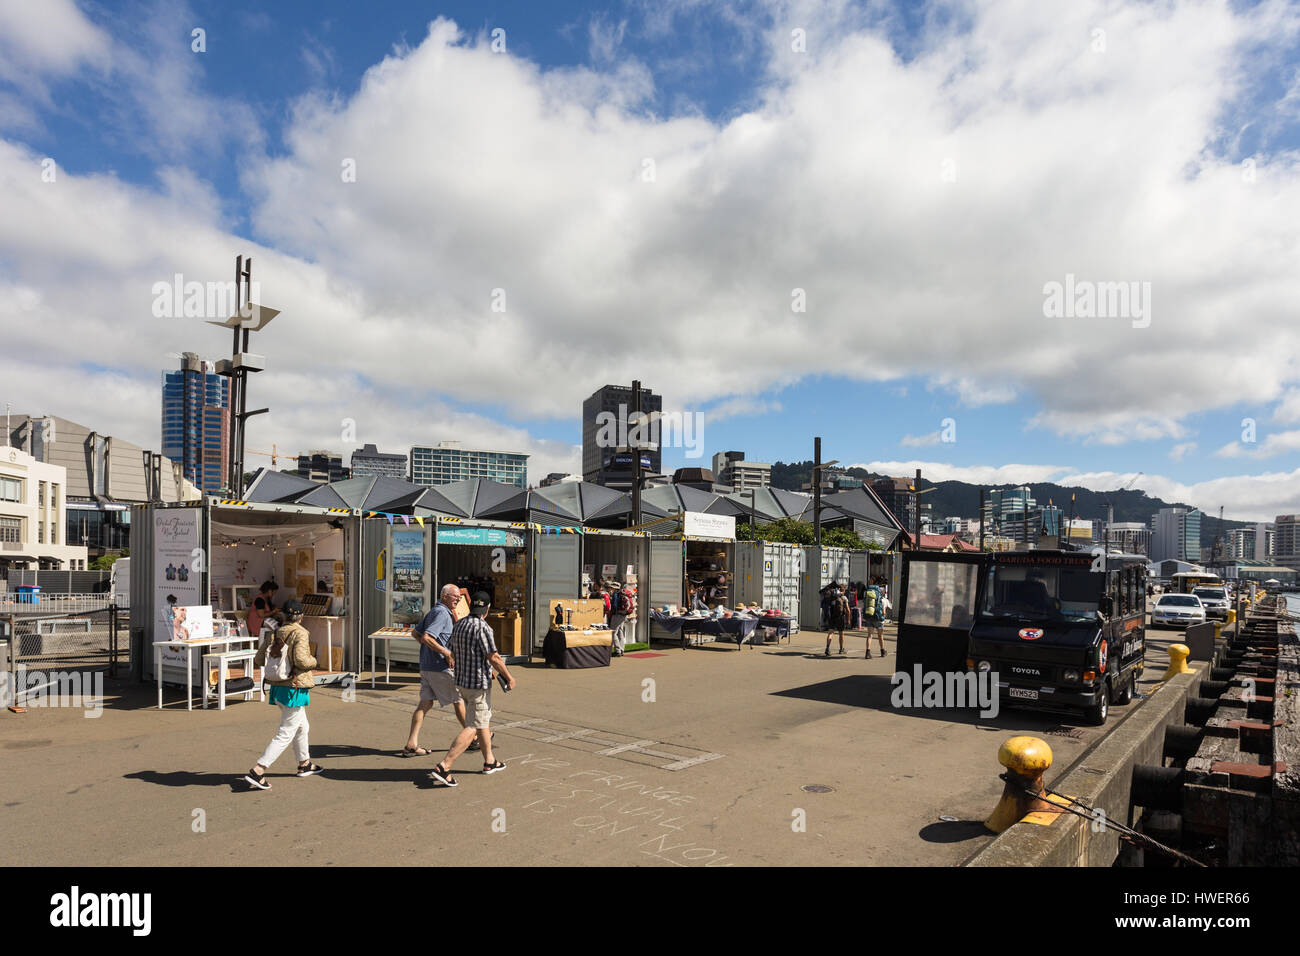 WELLINGTON, NEW ZEALAND - MARCH 2, 2017: Yound men wander aound the street market in the Wellington waterfront promenade on a sunny summer day. Stock Photo